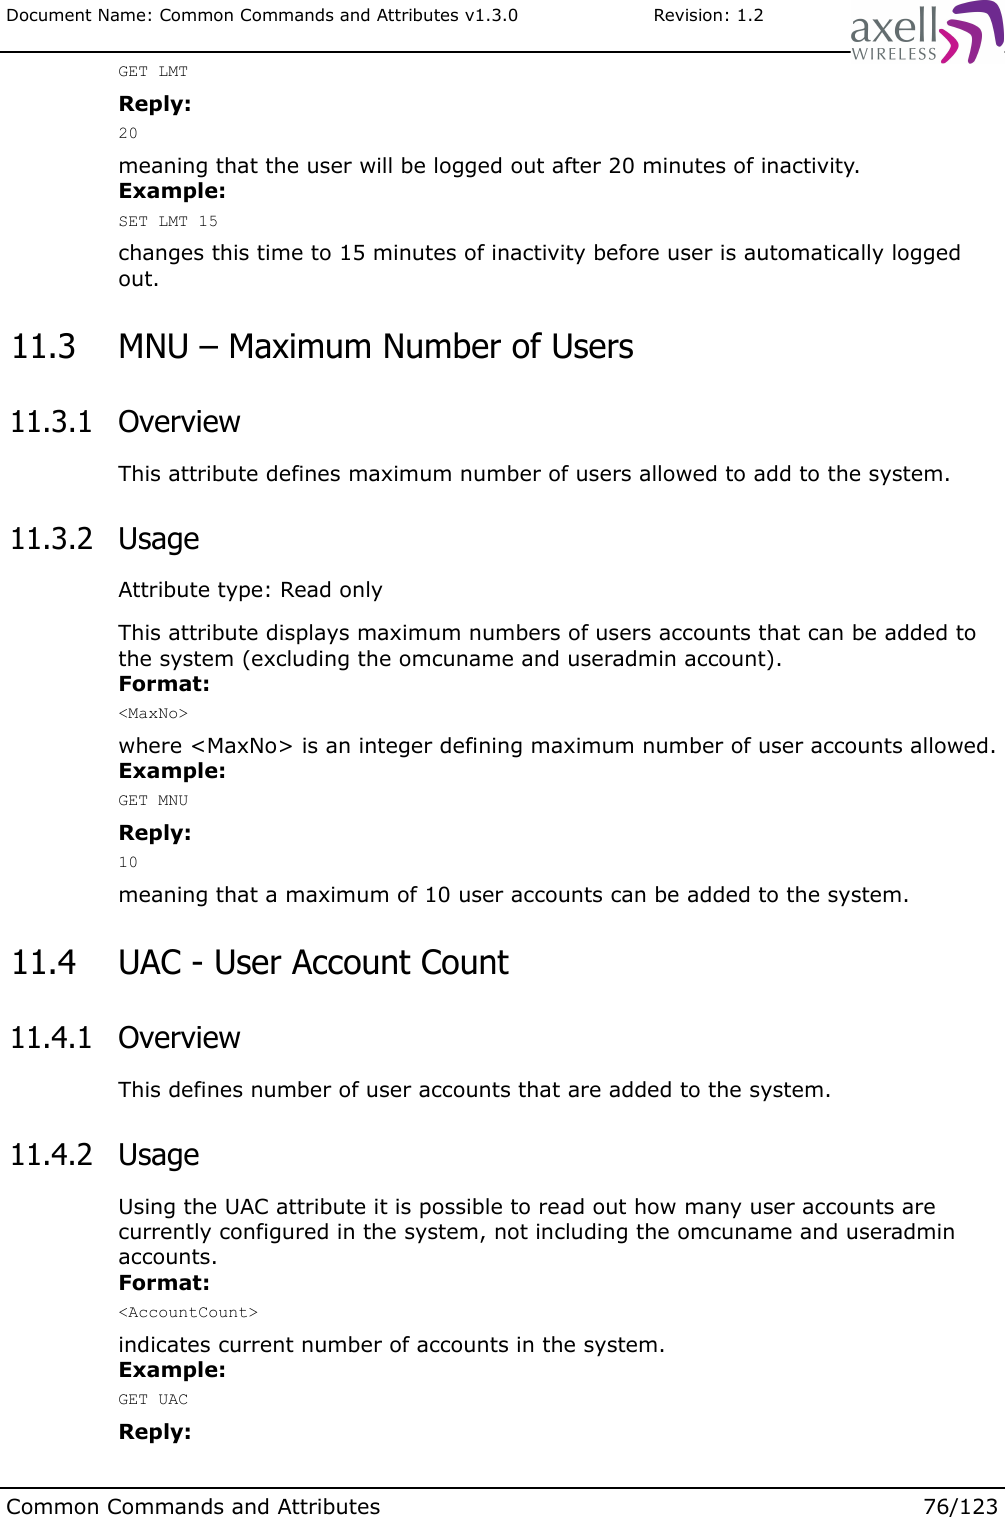 Document Name: Common Commands and Attributes v1.3.0                       Revision: 1.2GET LMTReply:20meaning that the user will be logged out after 20 minutes of inactivity.Example:SET LMT 15changes this time to 15 minutes of inactivity before user is automatically logged out. 11.3  MNU – Maximum Number of Users 11.3.1  OverviewThis attribute defines maximum number of users allowed to add to the system. 11.3.2  UsageAttribute type: Read onlyThis attribute displays maximum numbers of users accounts that can be added to the system (excluding the omcuname and useradmin account).Format:&lt;MaxNo&gt;where &lt;MaxNo&gt; is an integer defining maximum number of user accounts allowed.Example:GET MNUReply:10meaning that a maximum of 10 user accounts can be added to the system. 11.4  UAC - User Account Count 11.4.1  OverviewThis defines number of user accounts that are added to the system. 11.4.2  UsageUsing the UAC attribute it is possible to read out how many user accounts are currently configured in the system, not including the omcuname and useradmin accounts.Format:&lt;AccountCount&gt;indicates current number of accounts in the system.Example:GET UACReply:Common Commands and Attributes 76/123